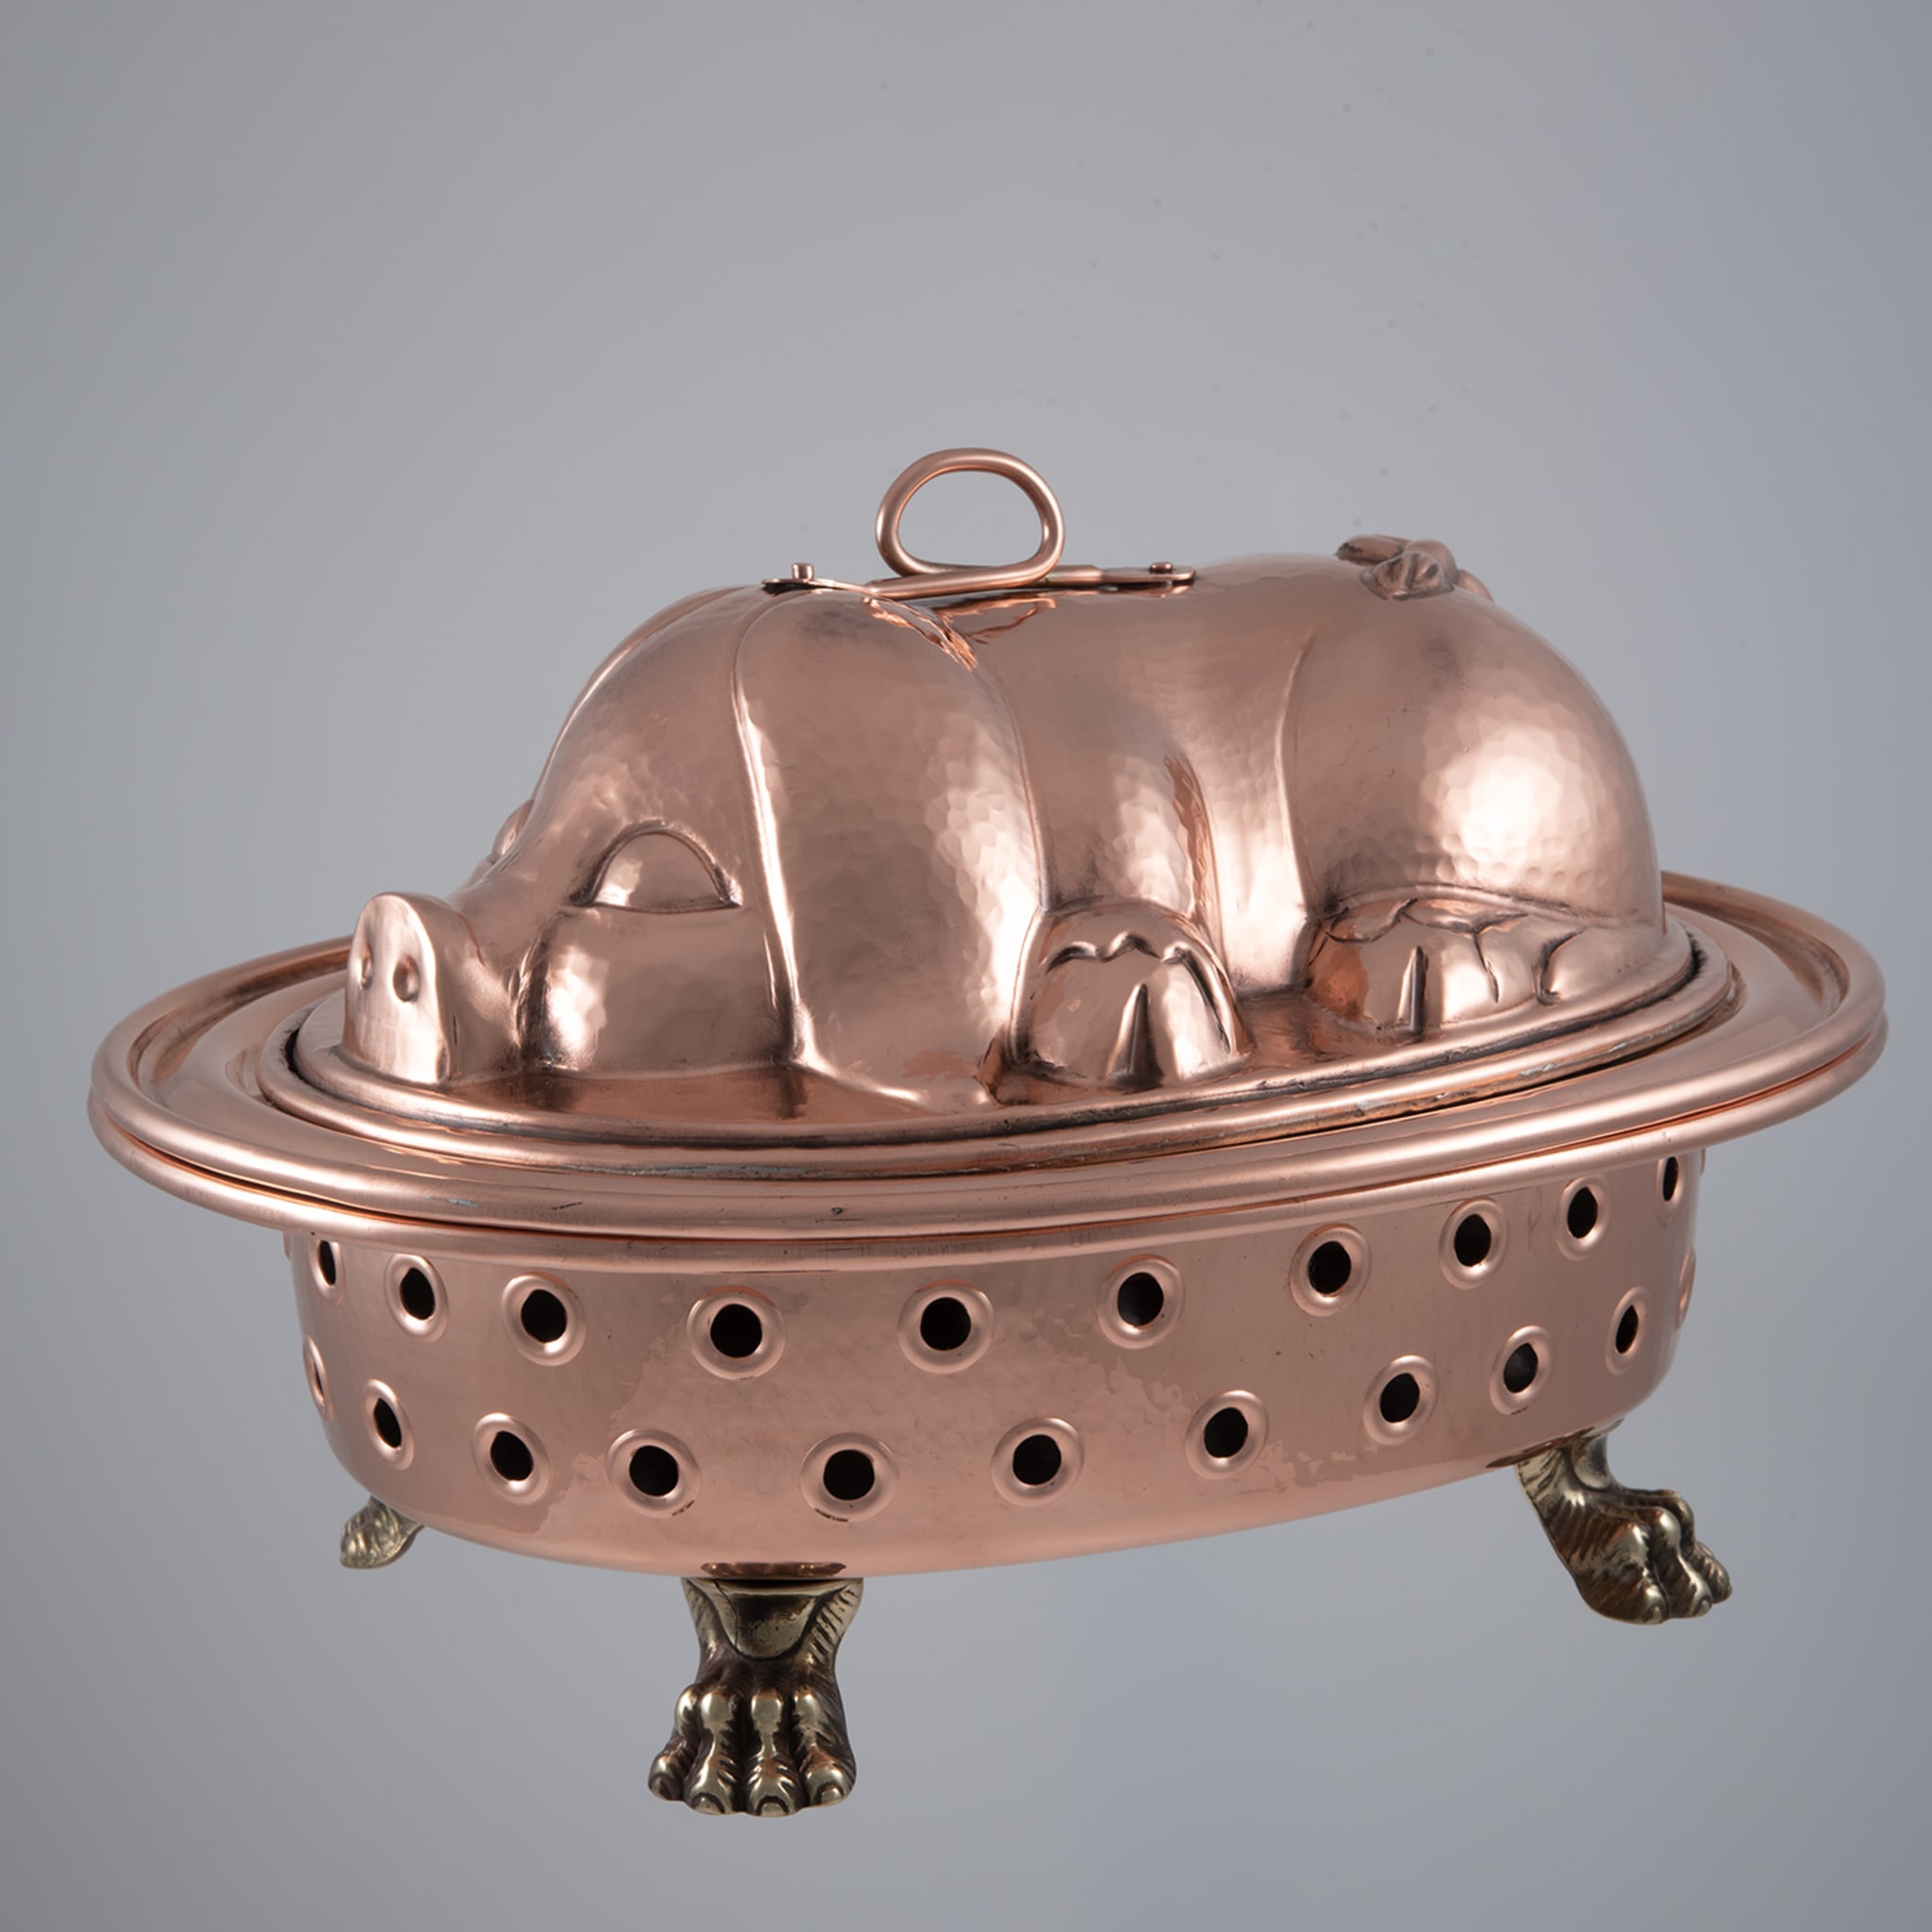 Pig-Shaped Copper Chafing Dish - Alternative view 1